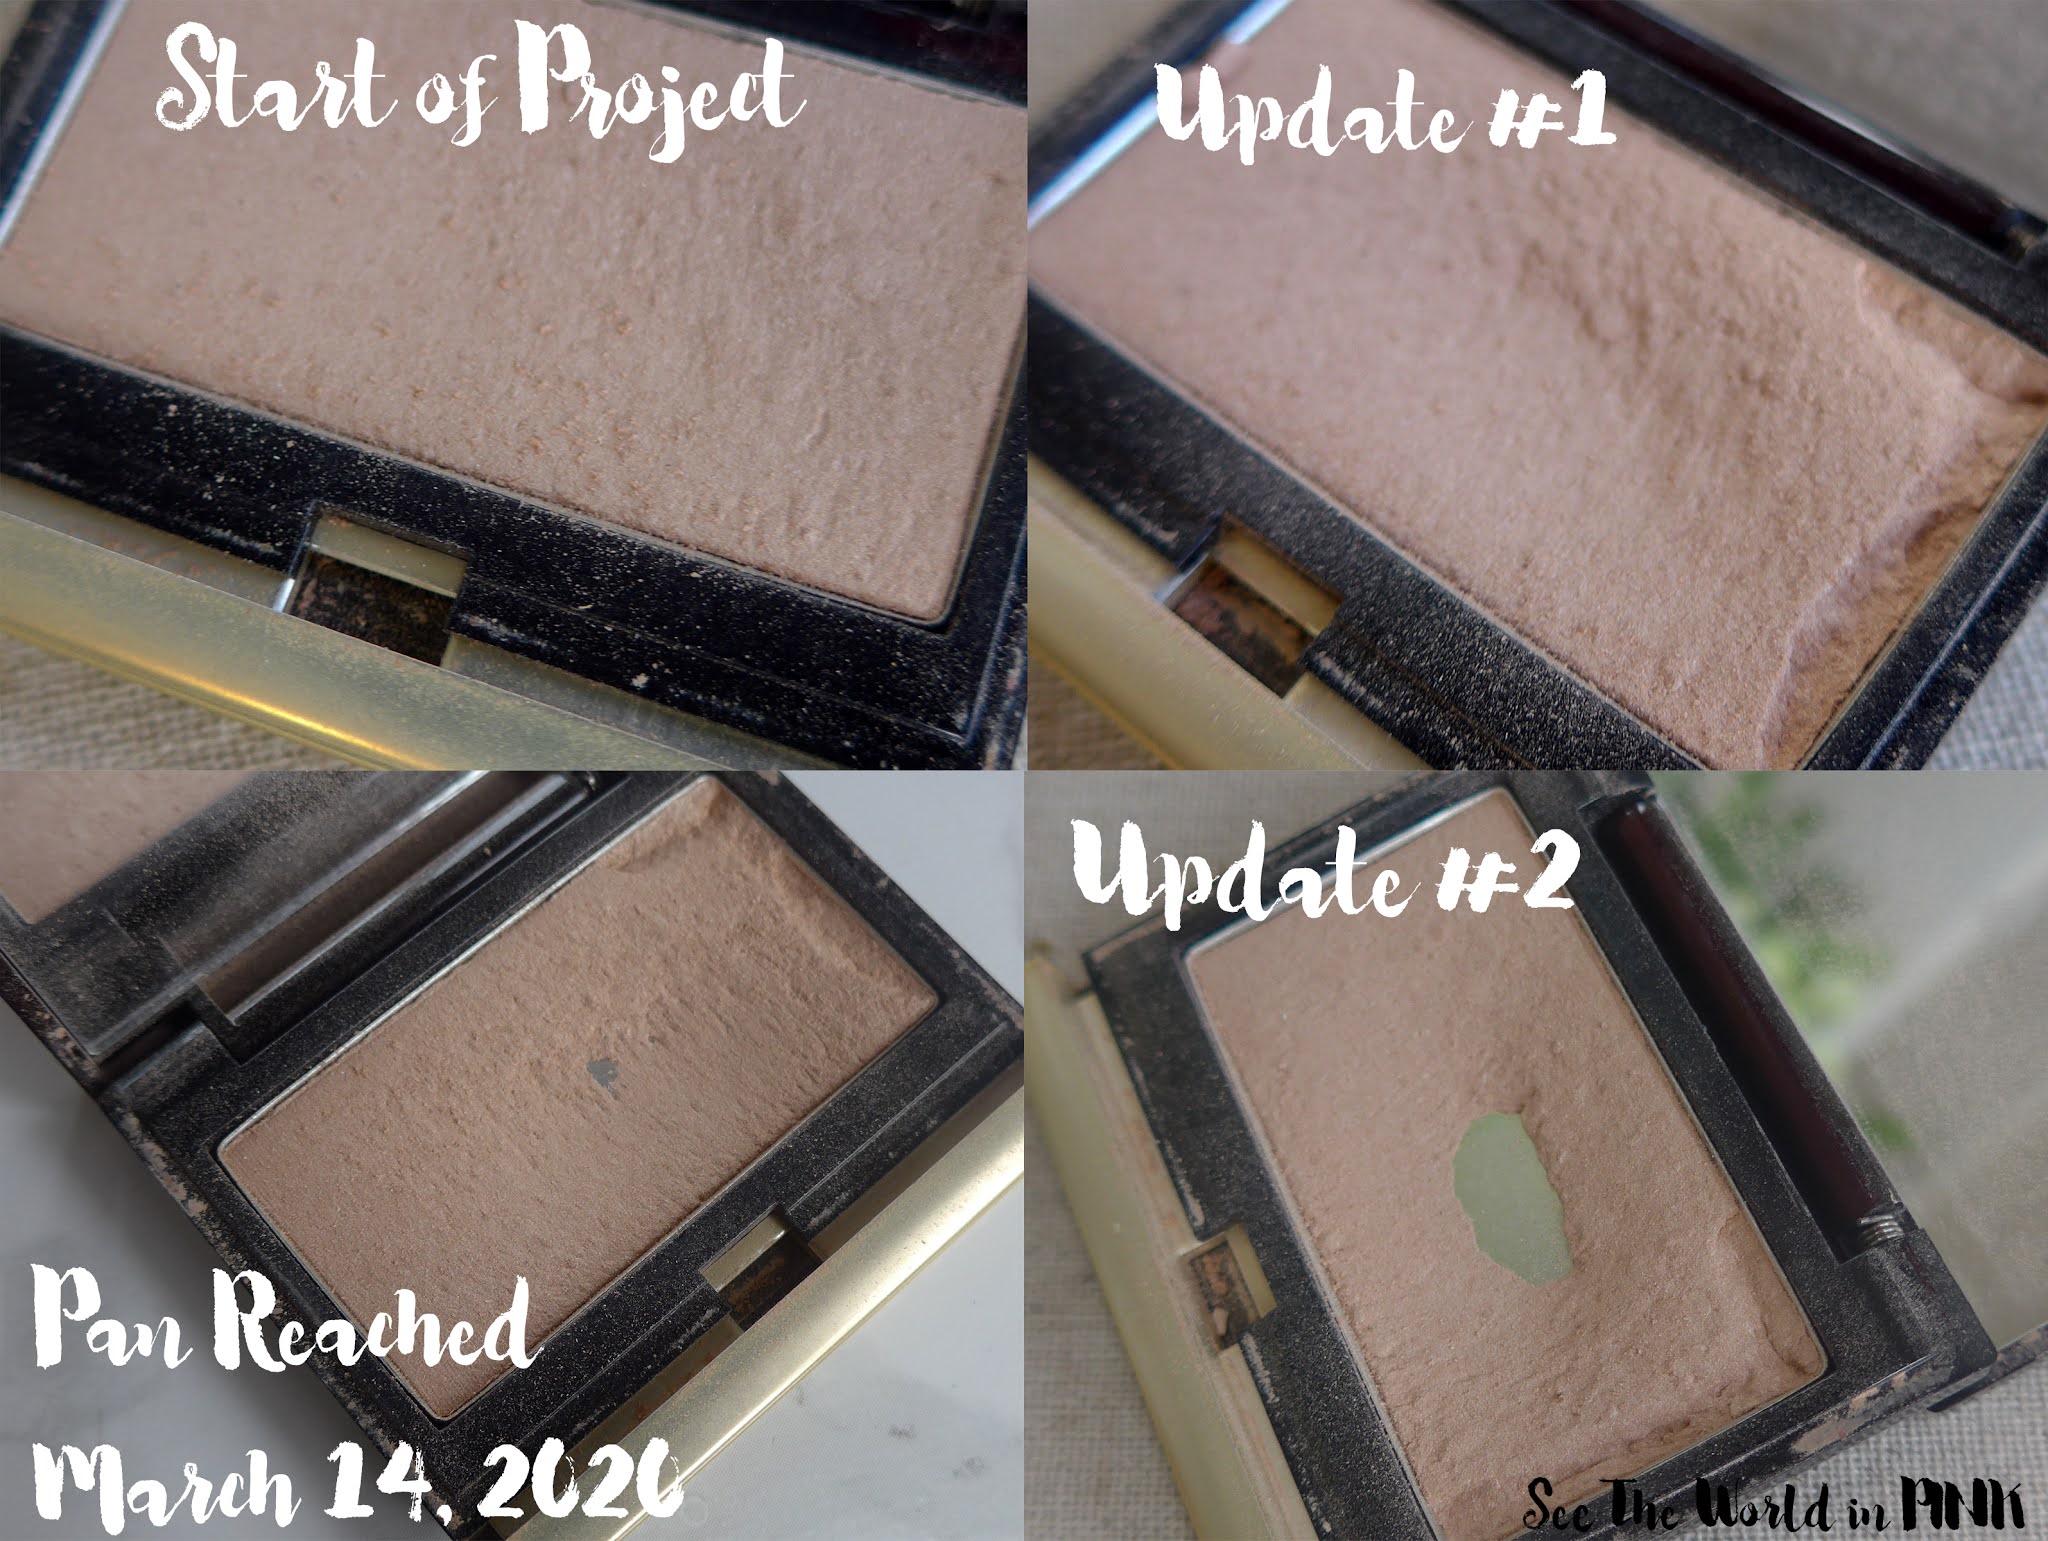 20 in 2020 Project Pan - Update #4